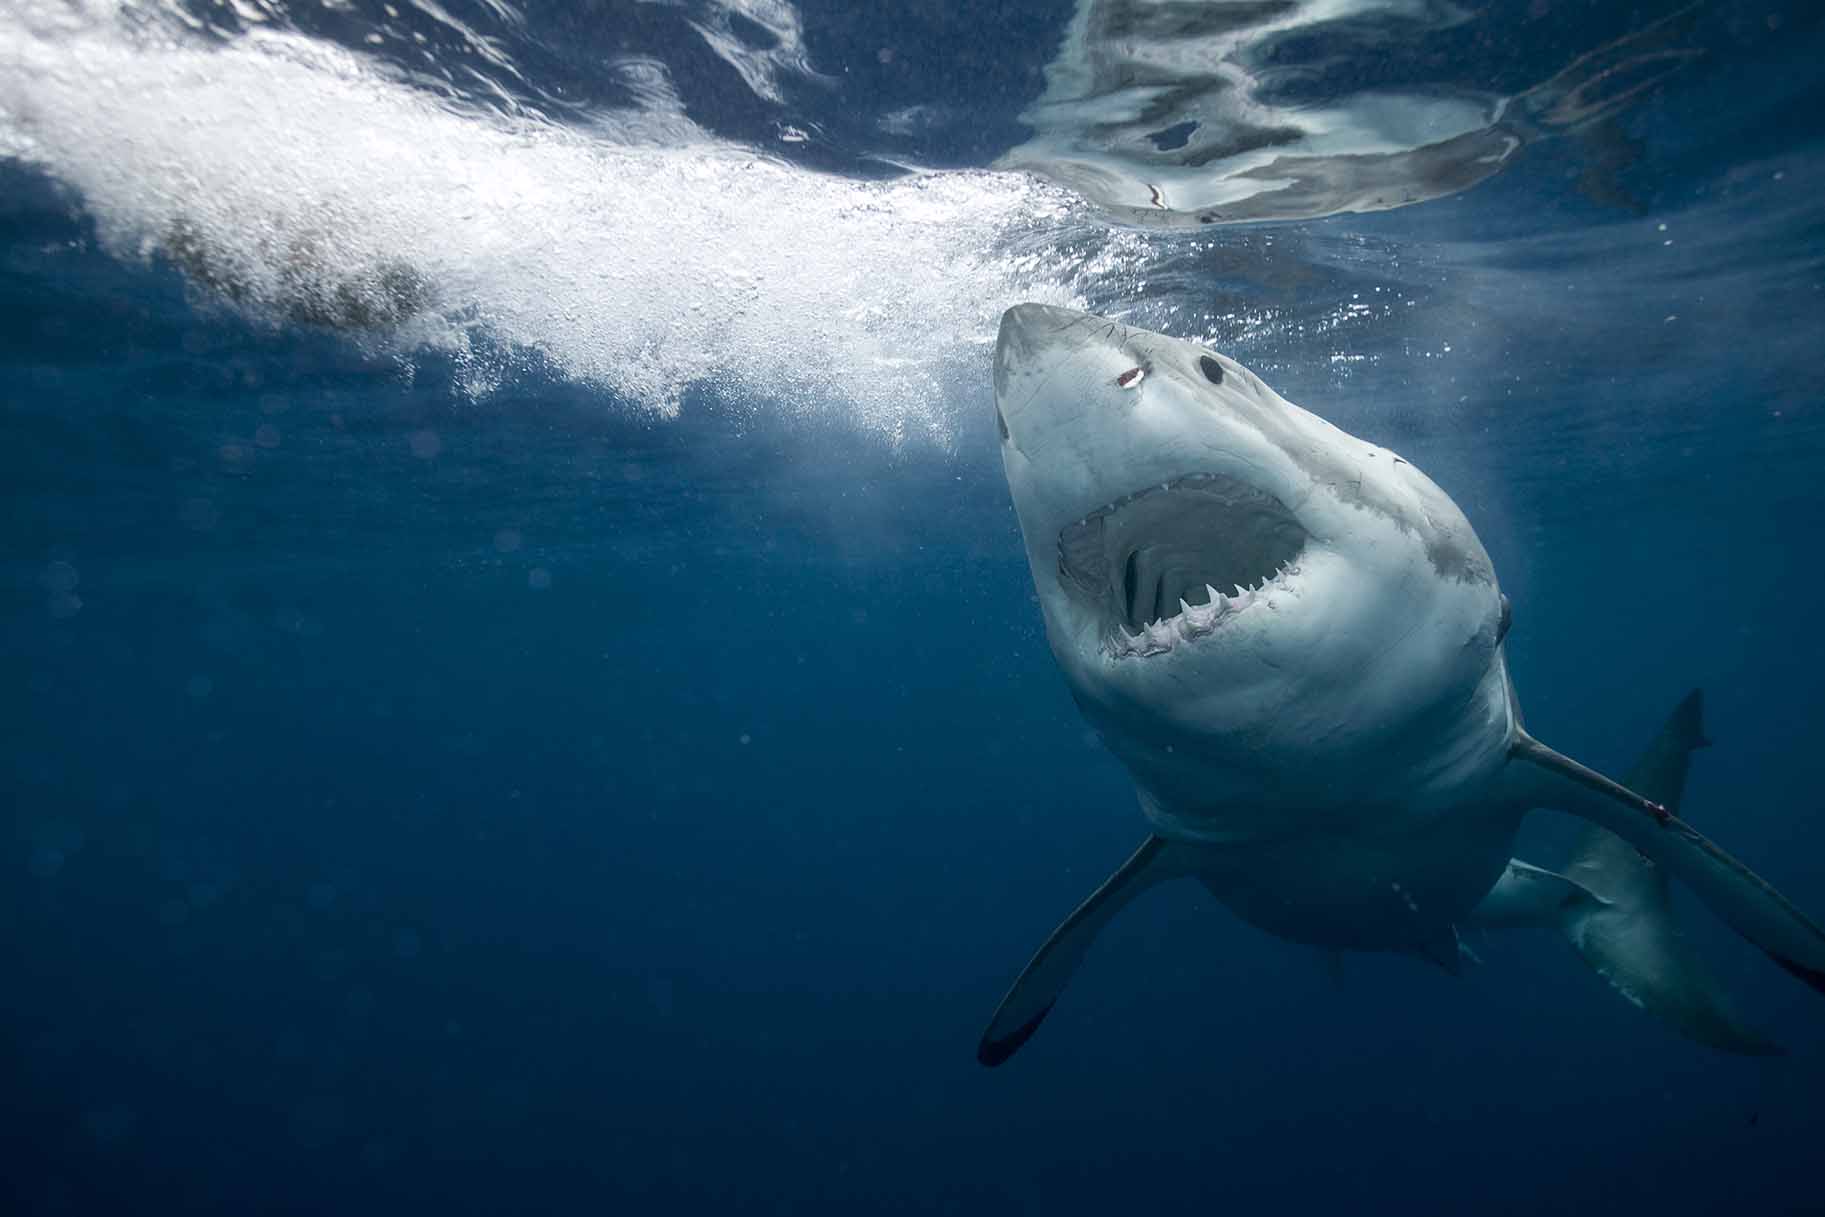 The 6 Coolest Things You (Probably) Didn't Know About Sharks